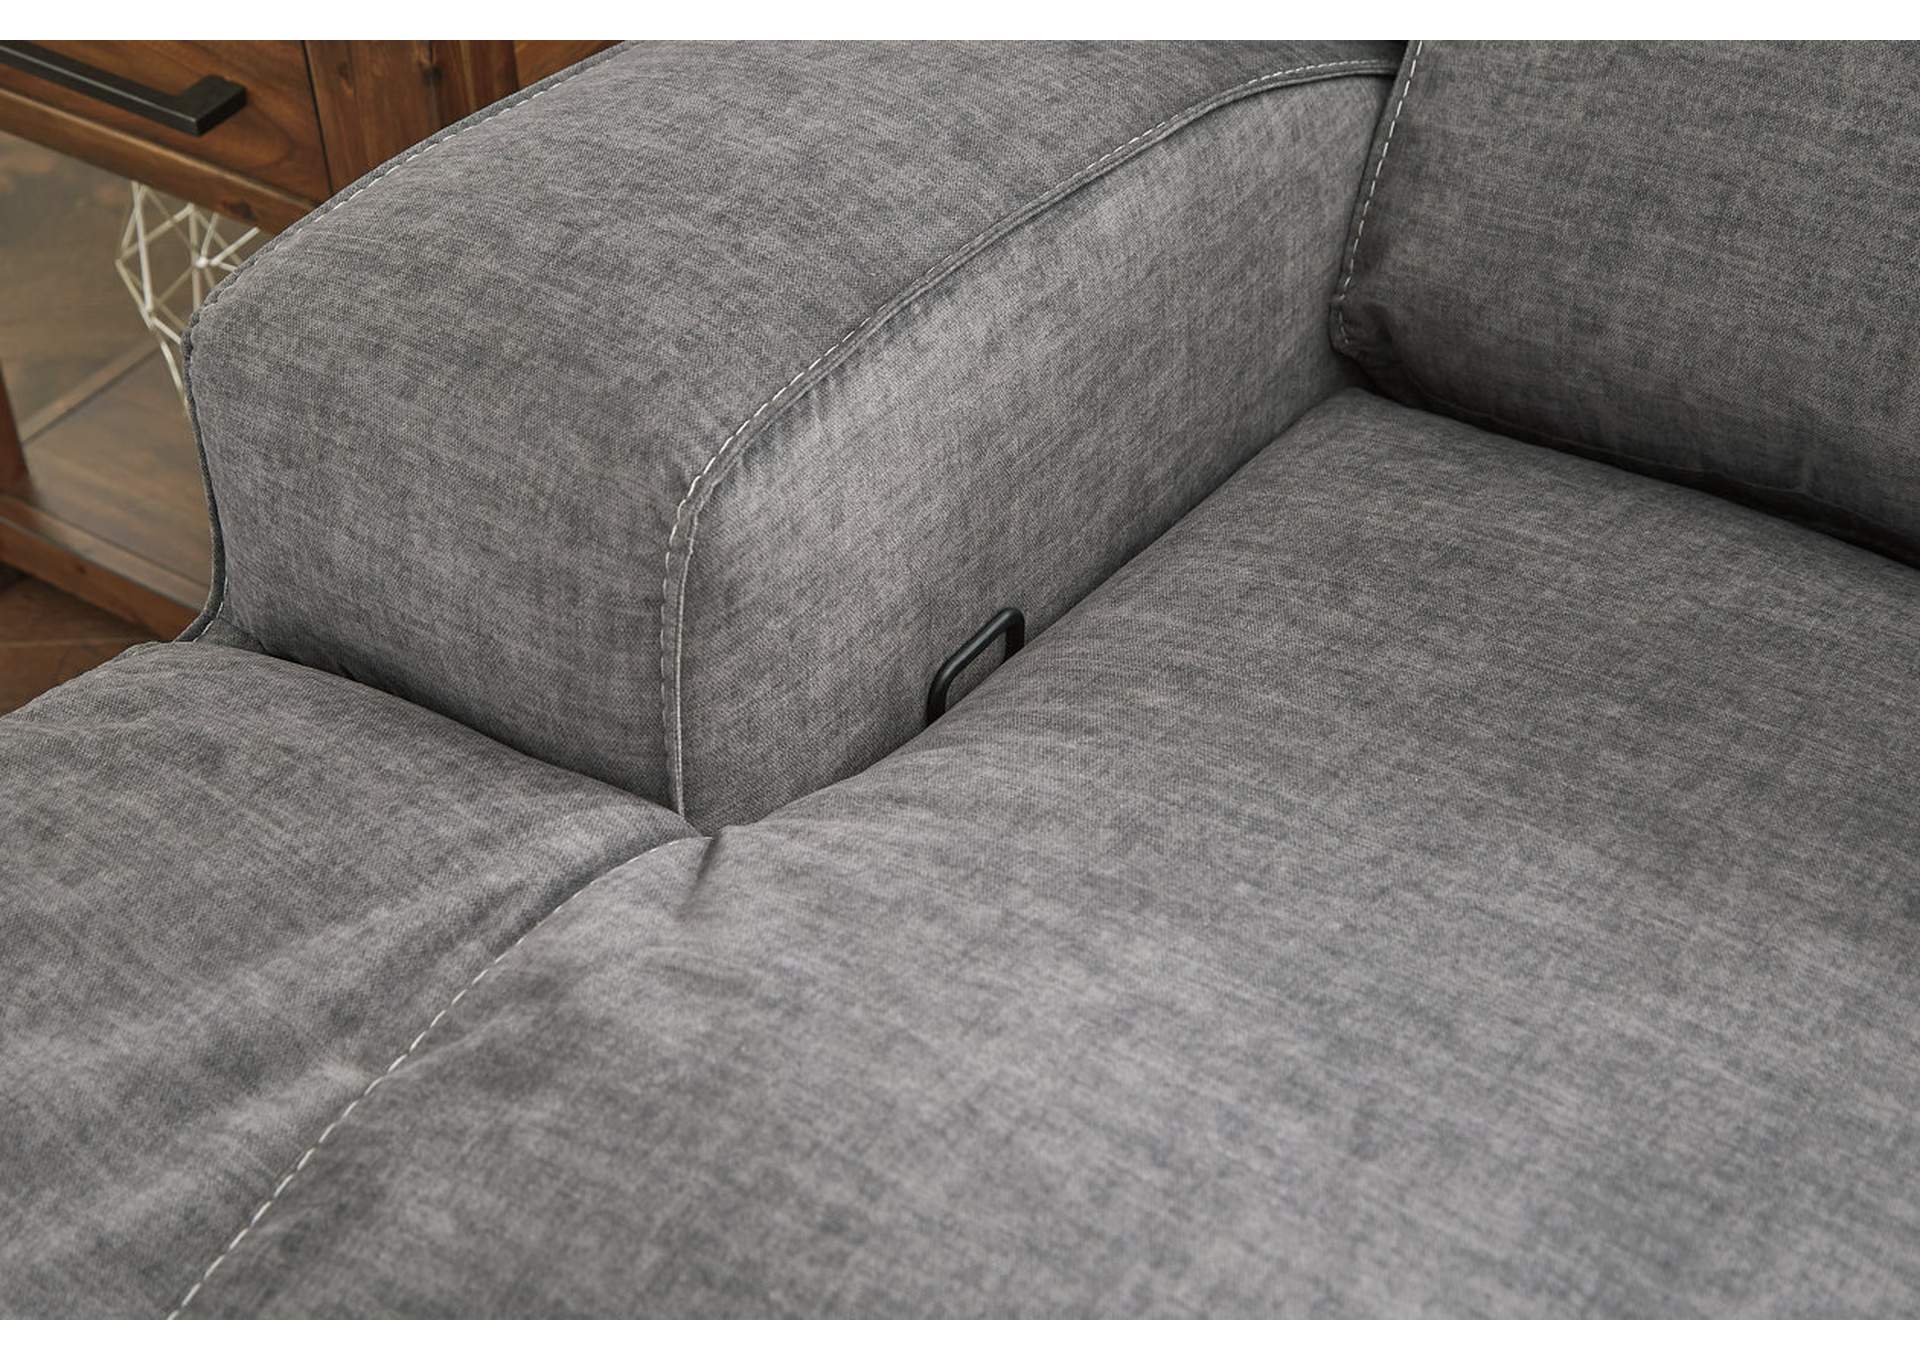 Coombs Reclining Sofa,Signature Design By Ashley